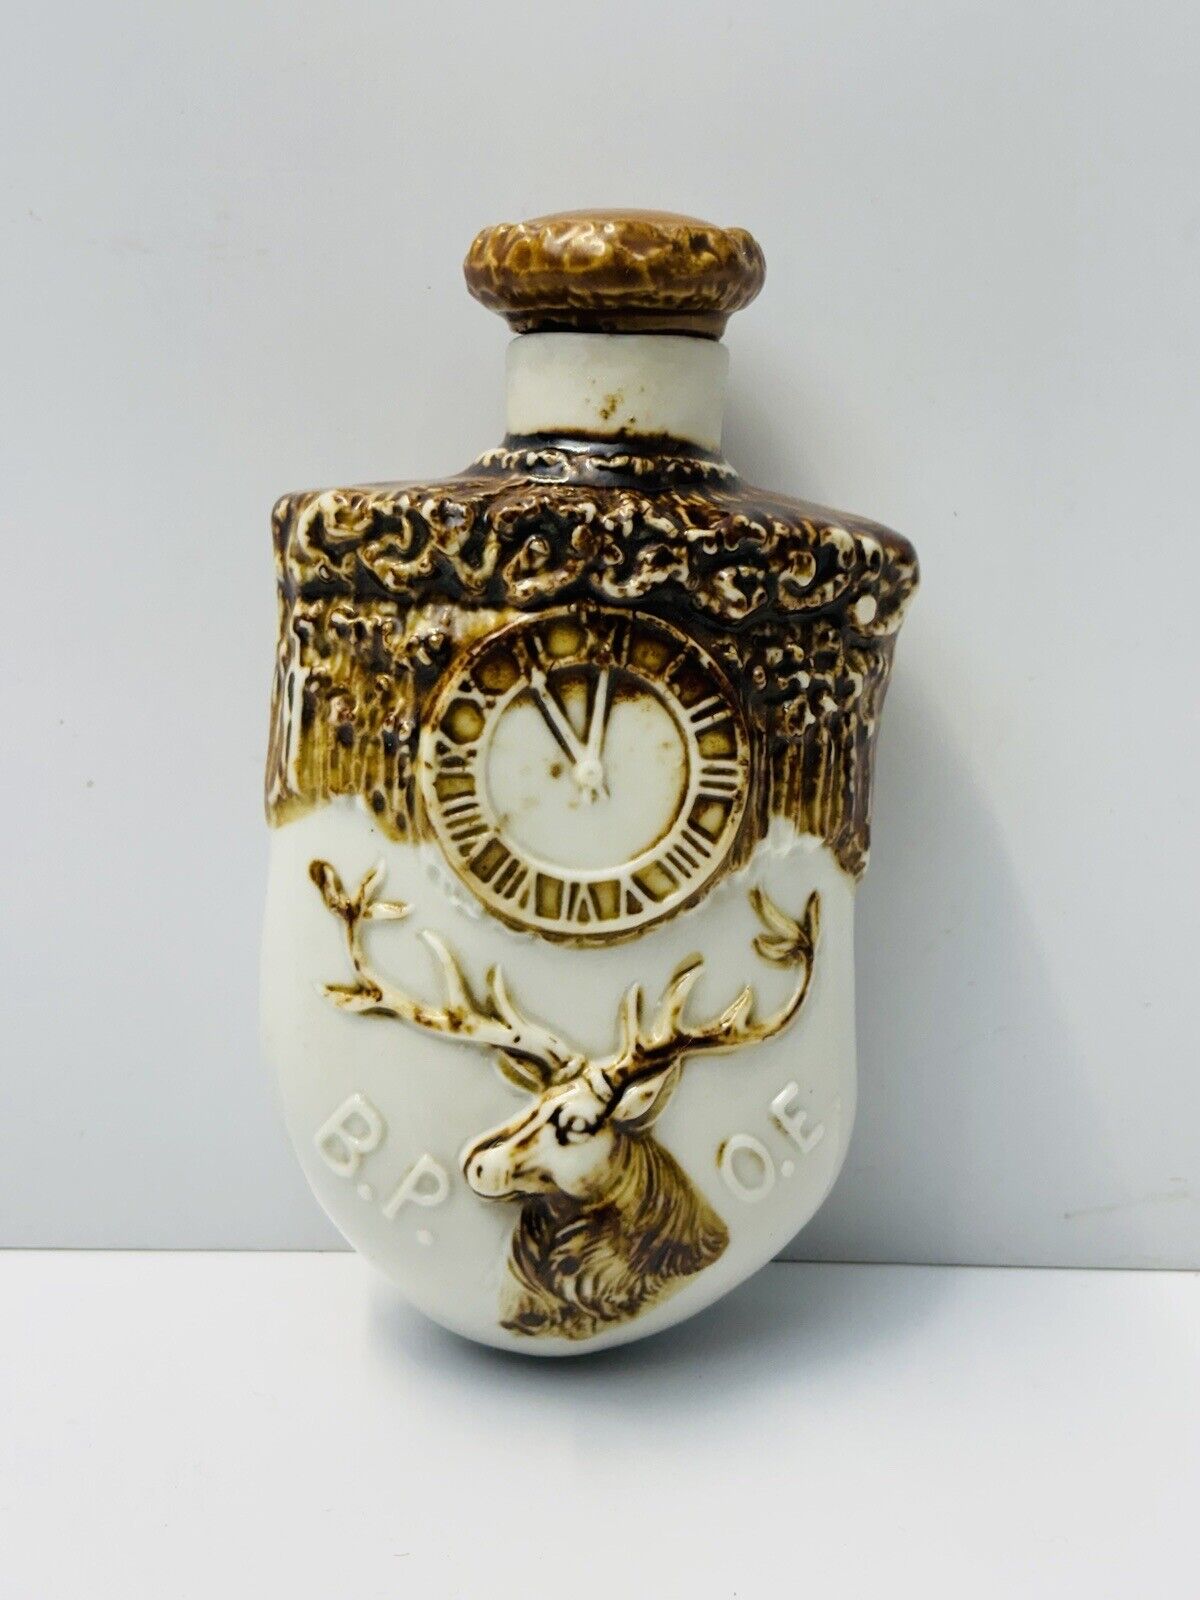 Schafer Water German Porcelain B.P.O.E. Tooth Whiskey Bottle Flask